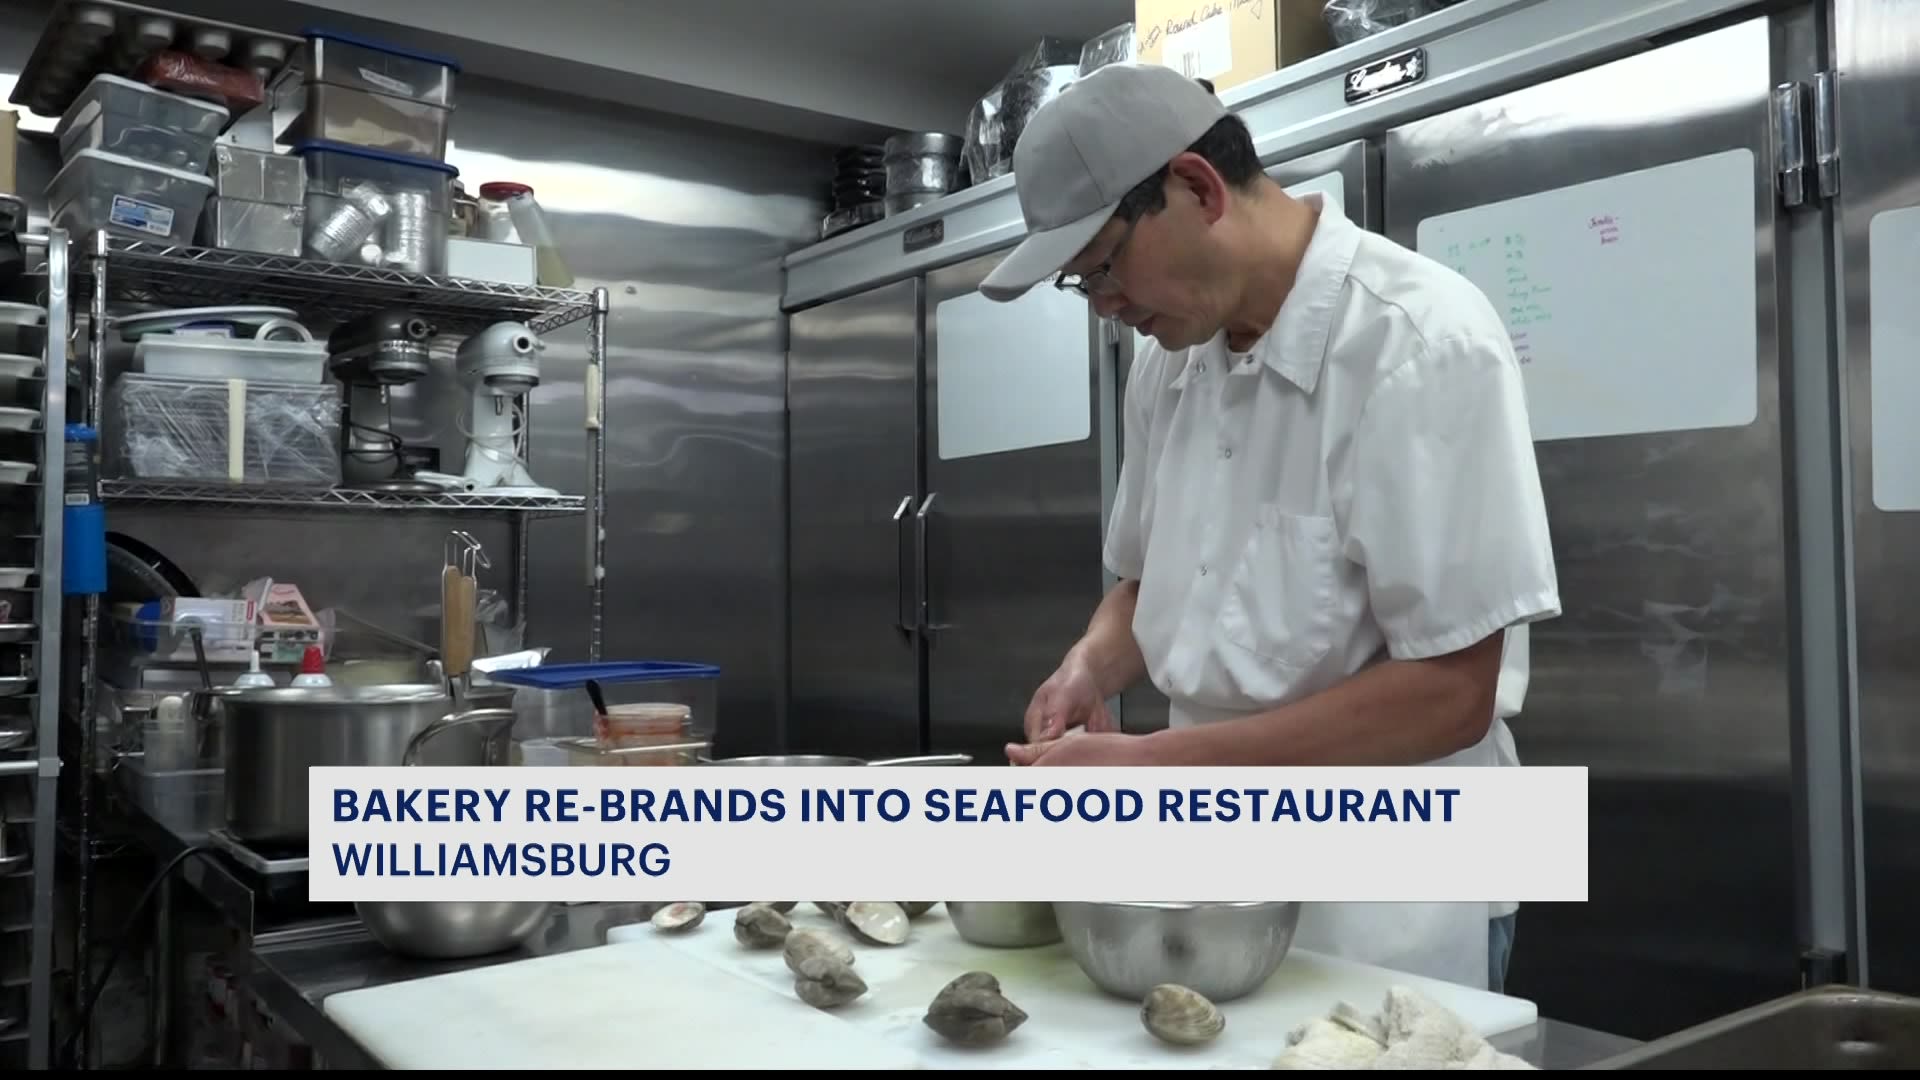 Chef transforms daughter's Williamsburg bakery into seafood restaurant